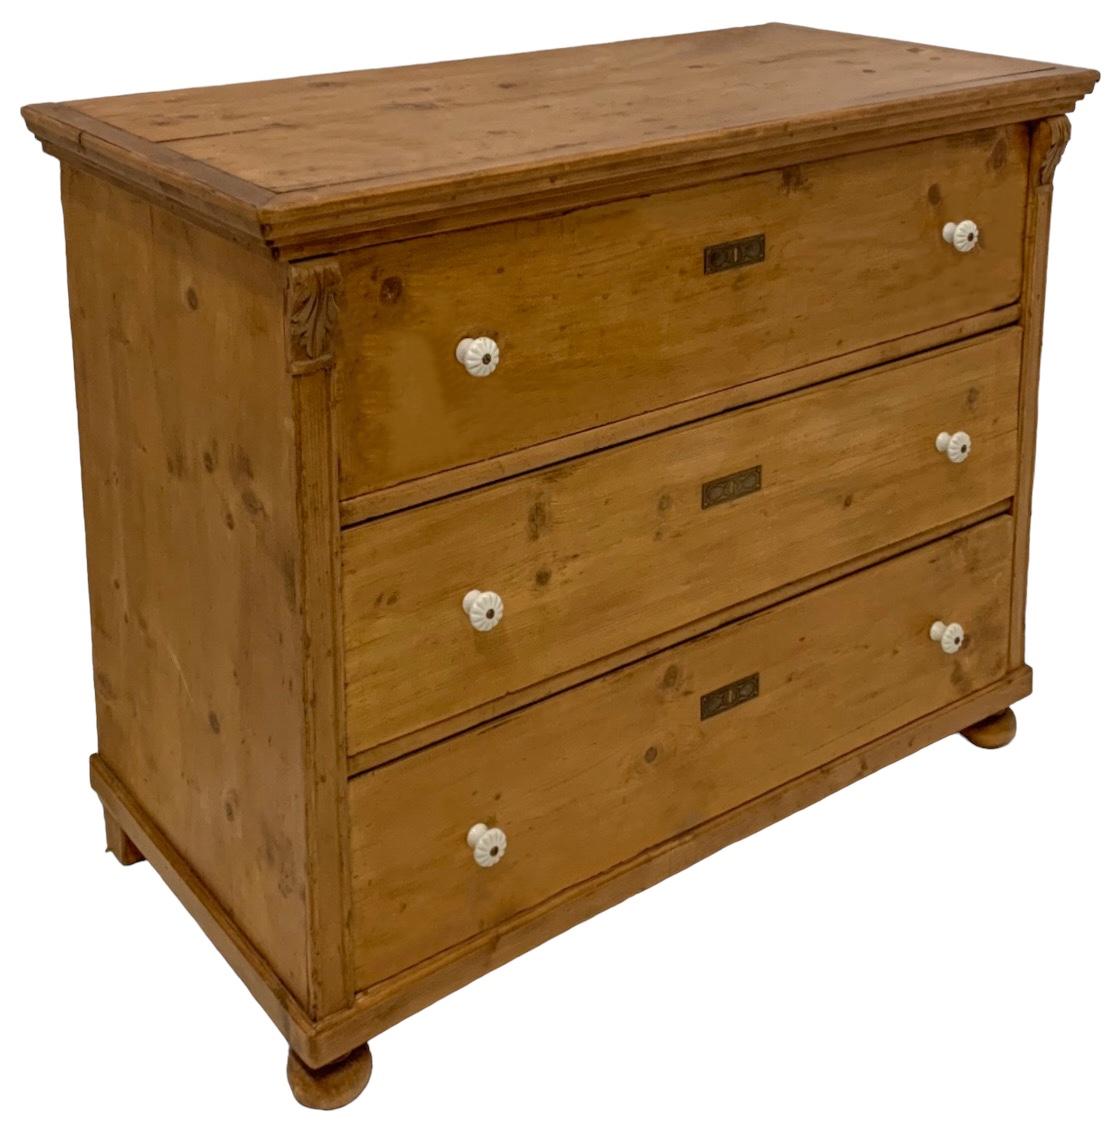 19th-C. Rustic English Country Pine Chest / Commode W / Porcelain Knobs For Sale 1